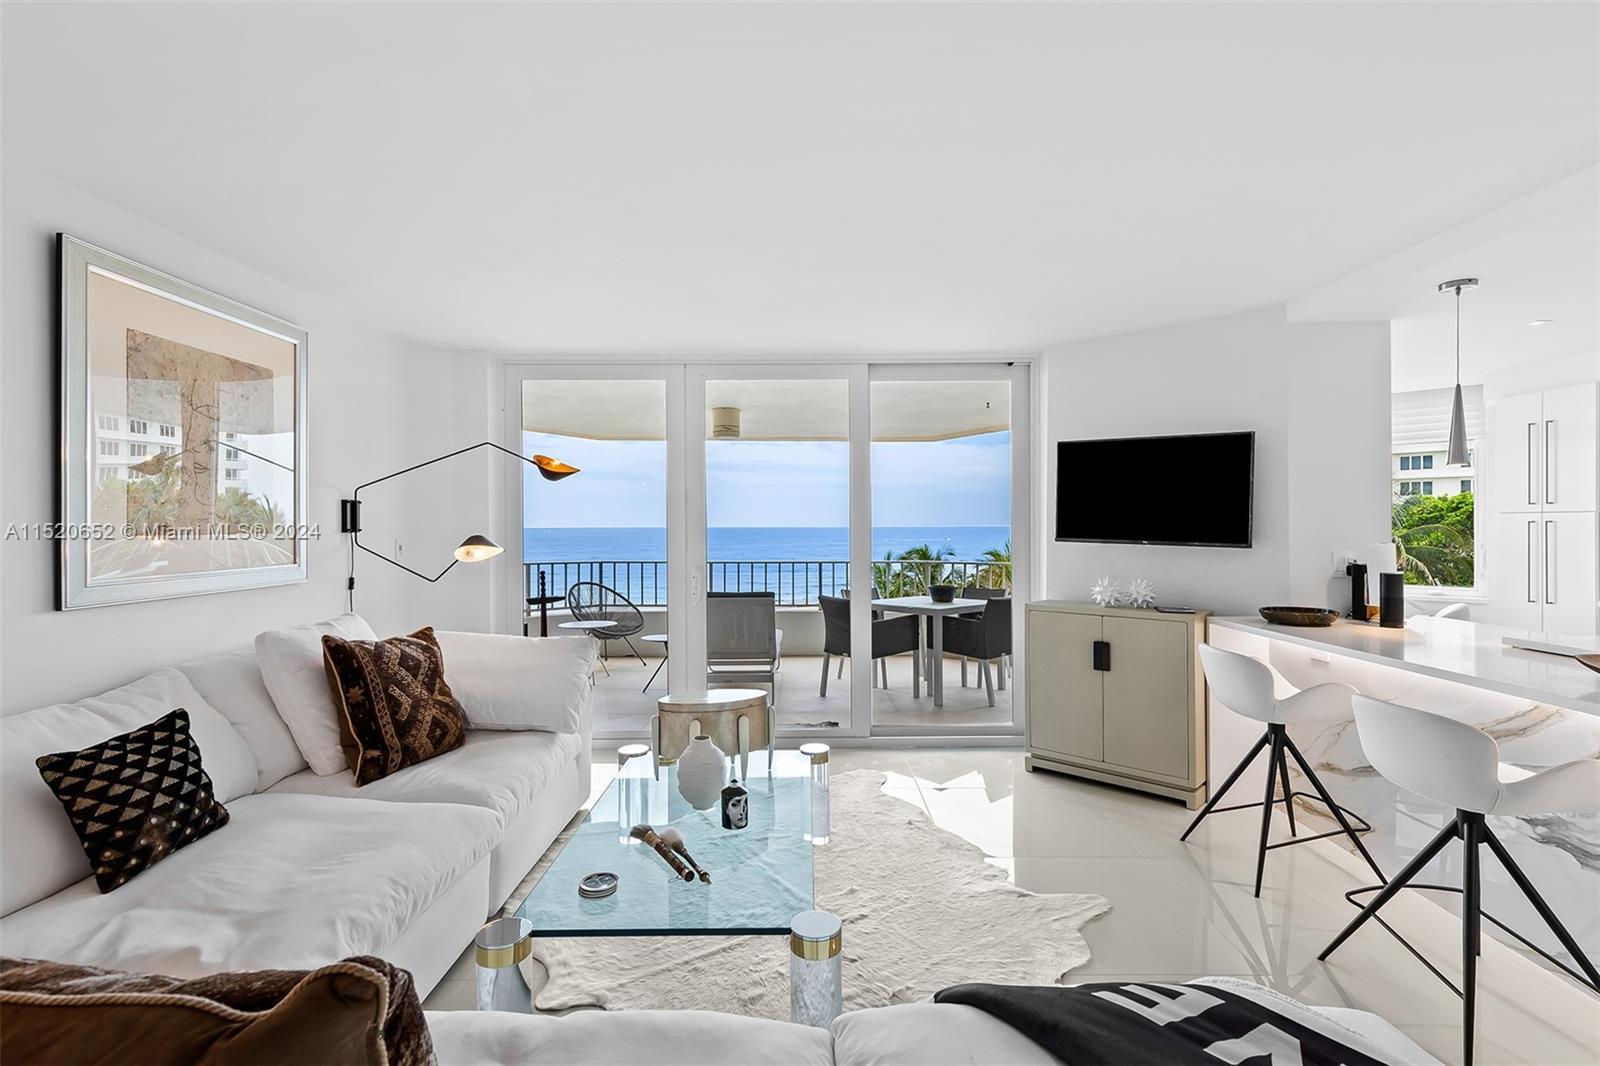 A journey for the senses, this 2 bedroom, 2 bathroom seaside retreat pairs comfort with style in equ